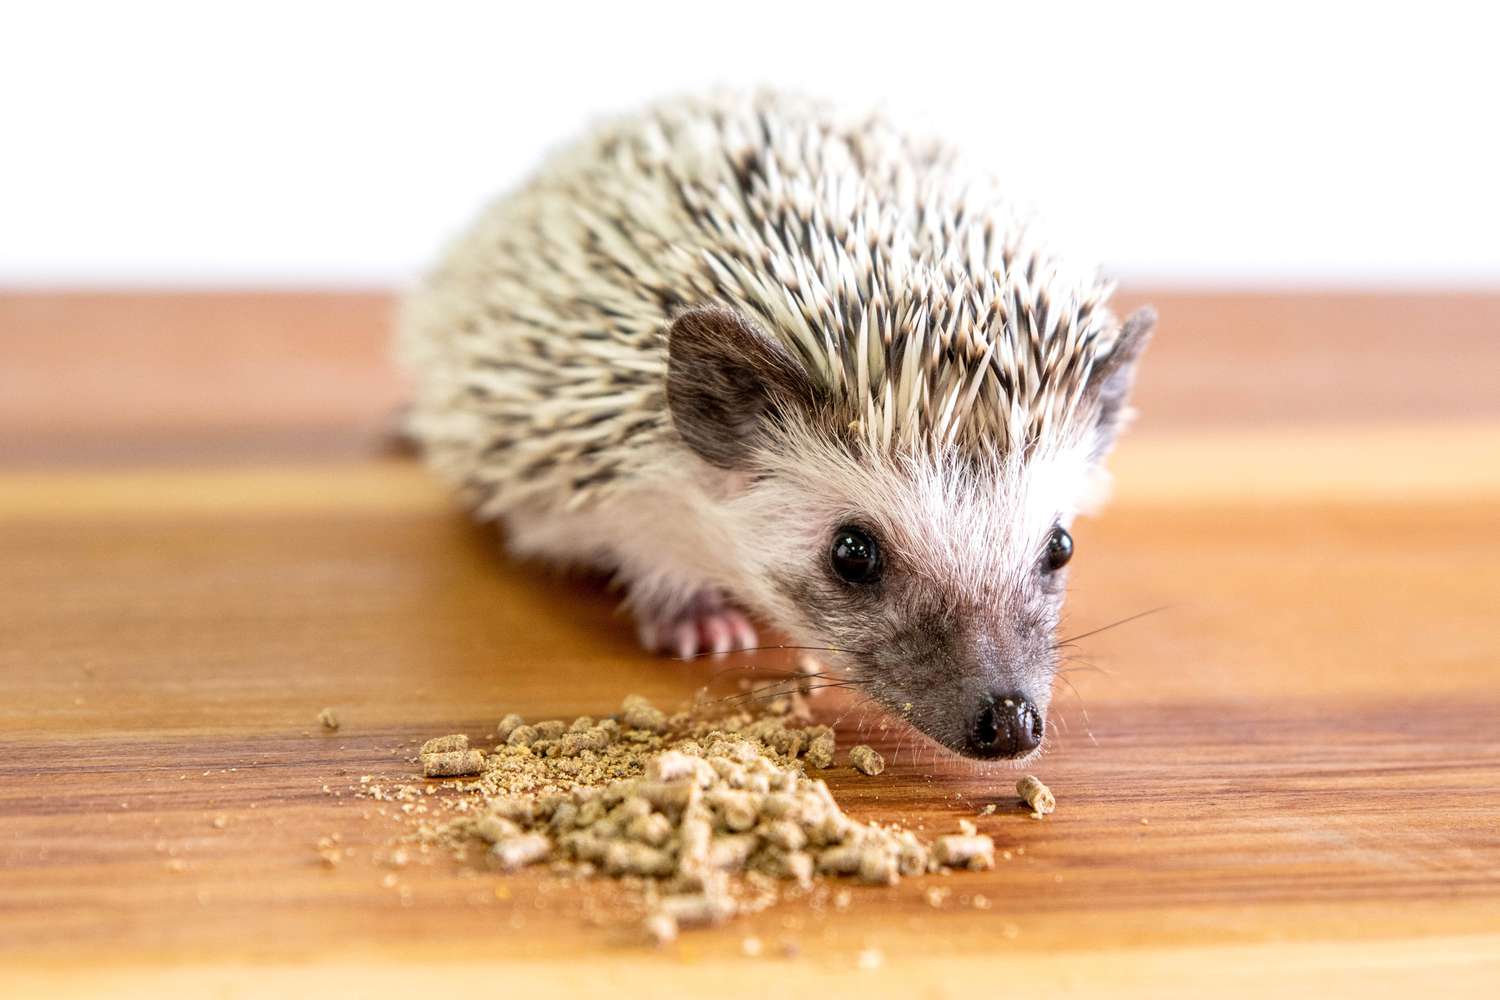 What human foods do hedgehogs eat?